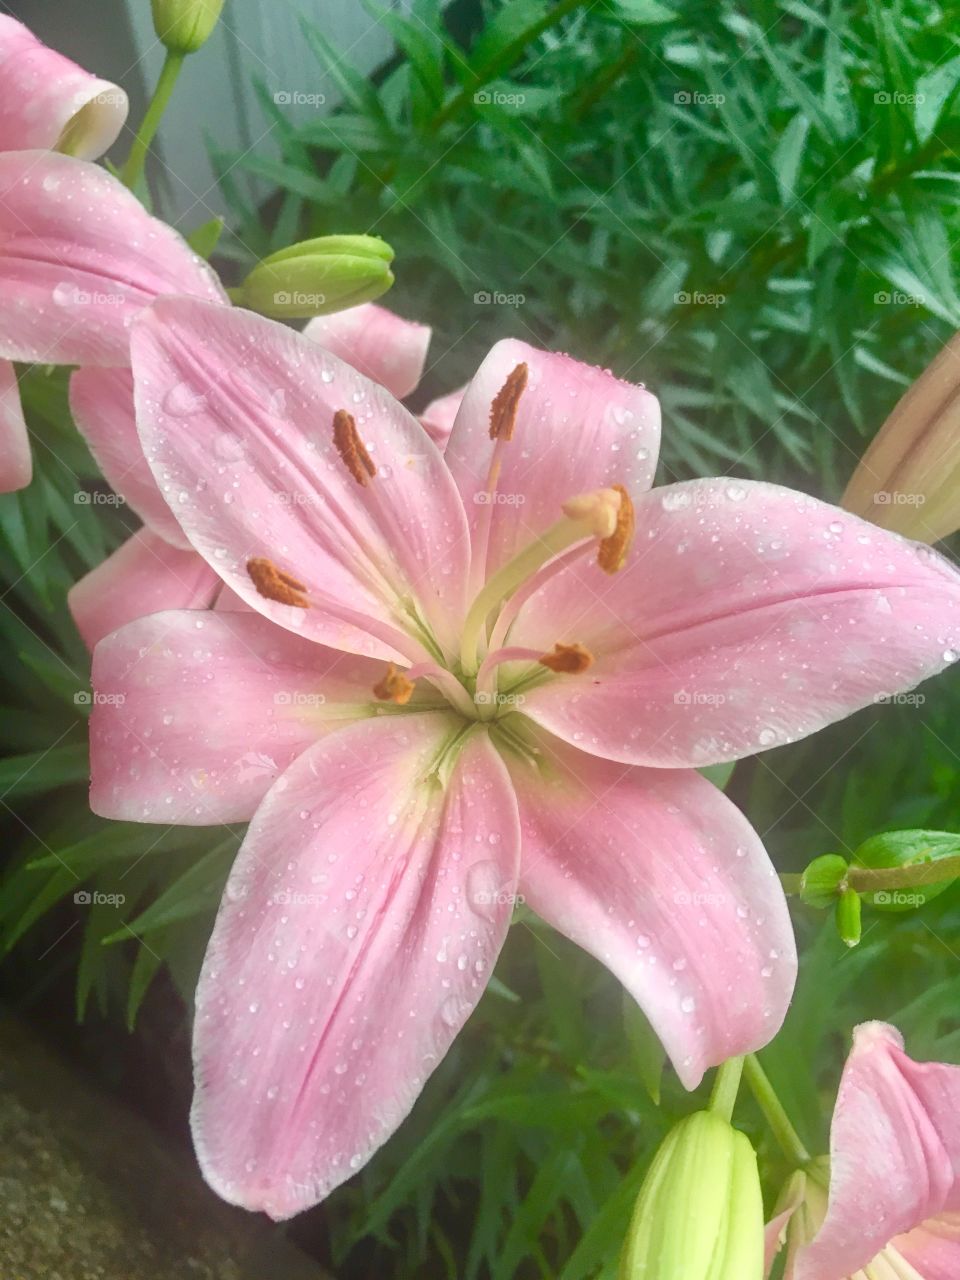 Raindrops on a pink lily In the summer.